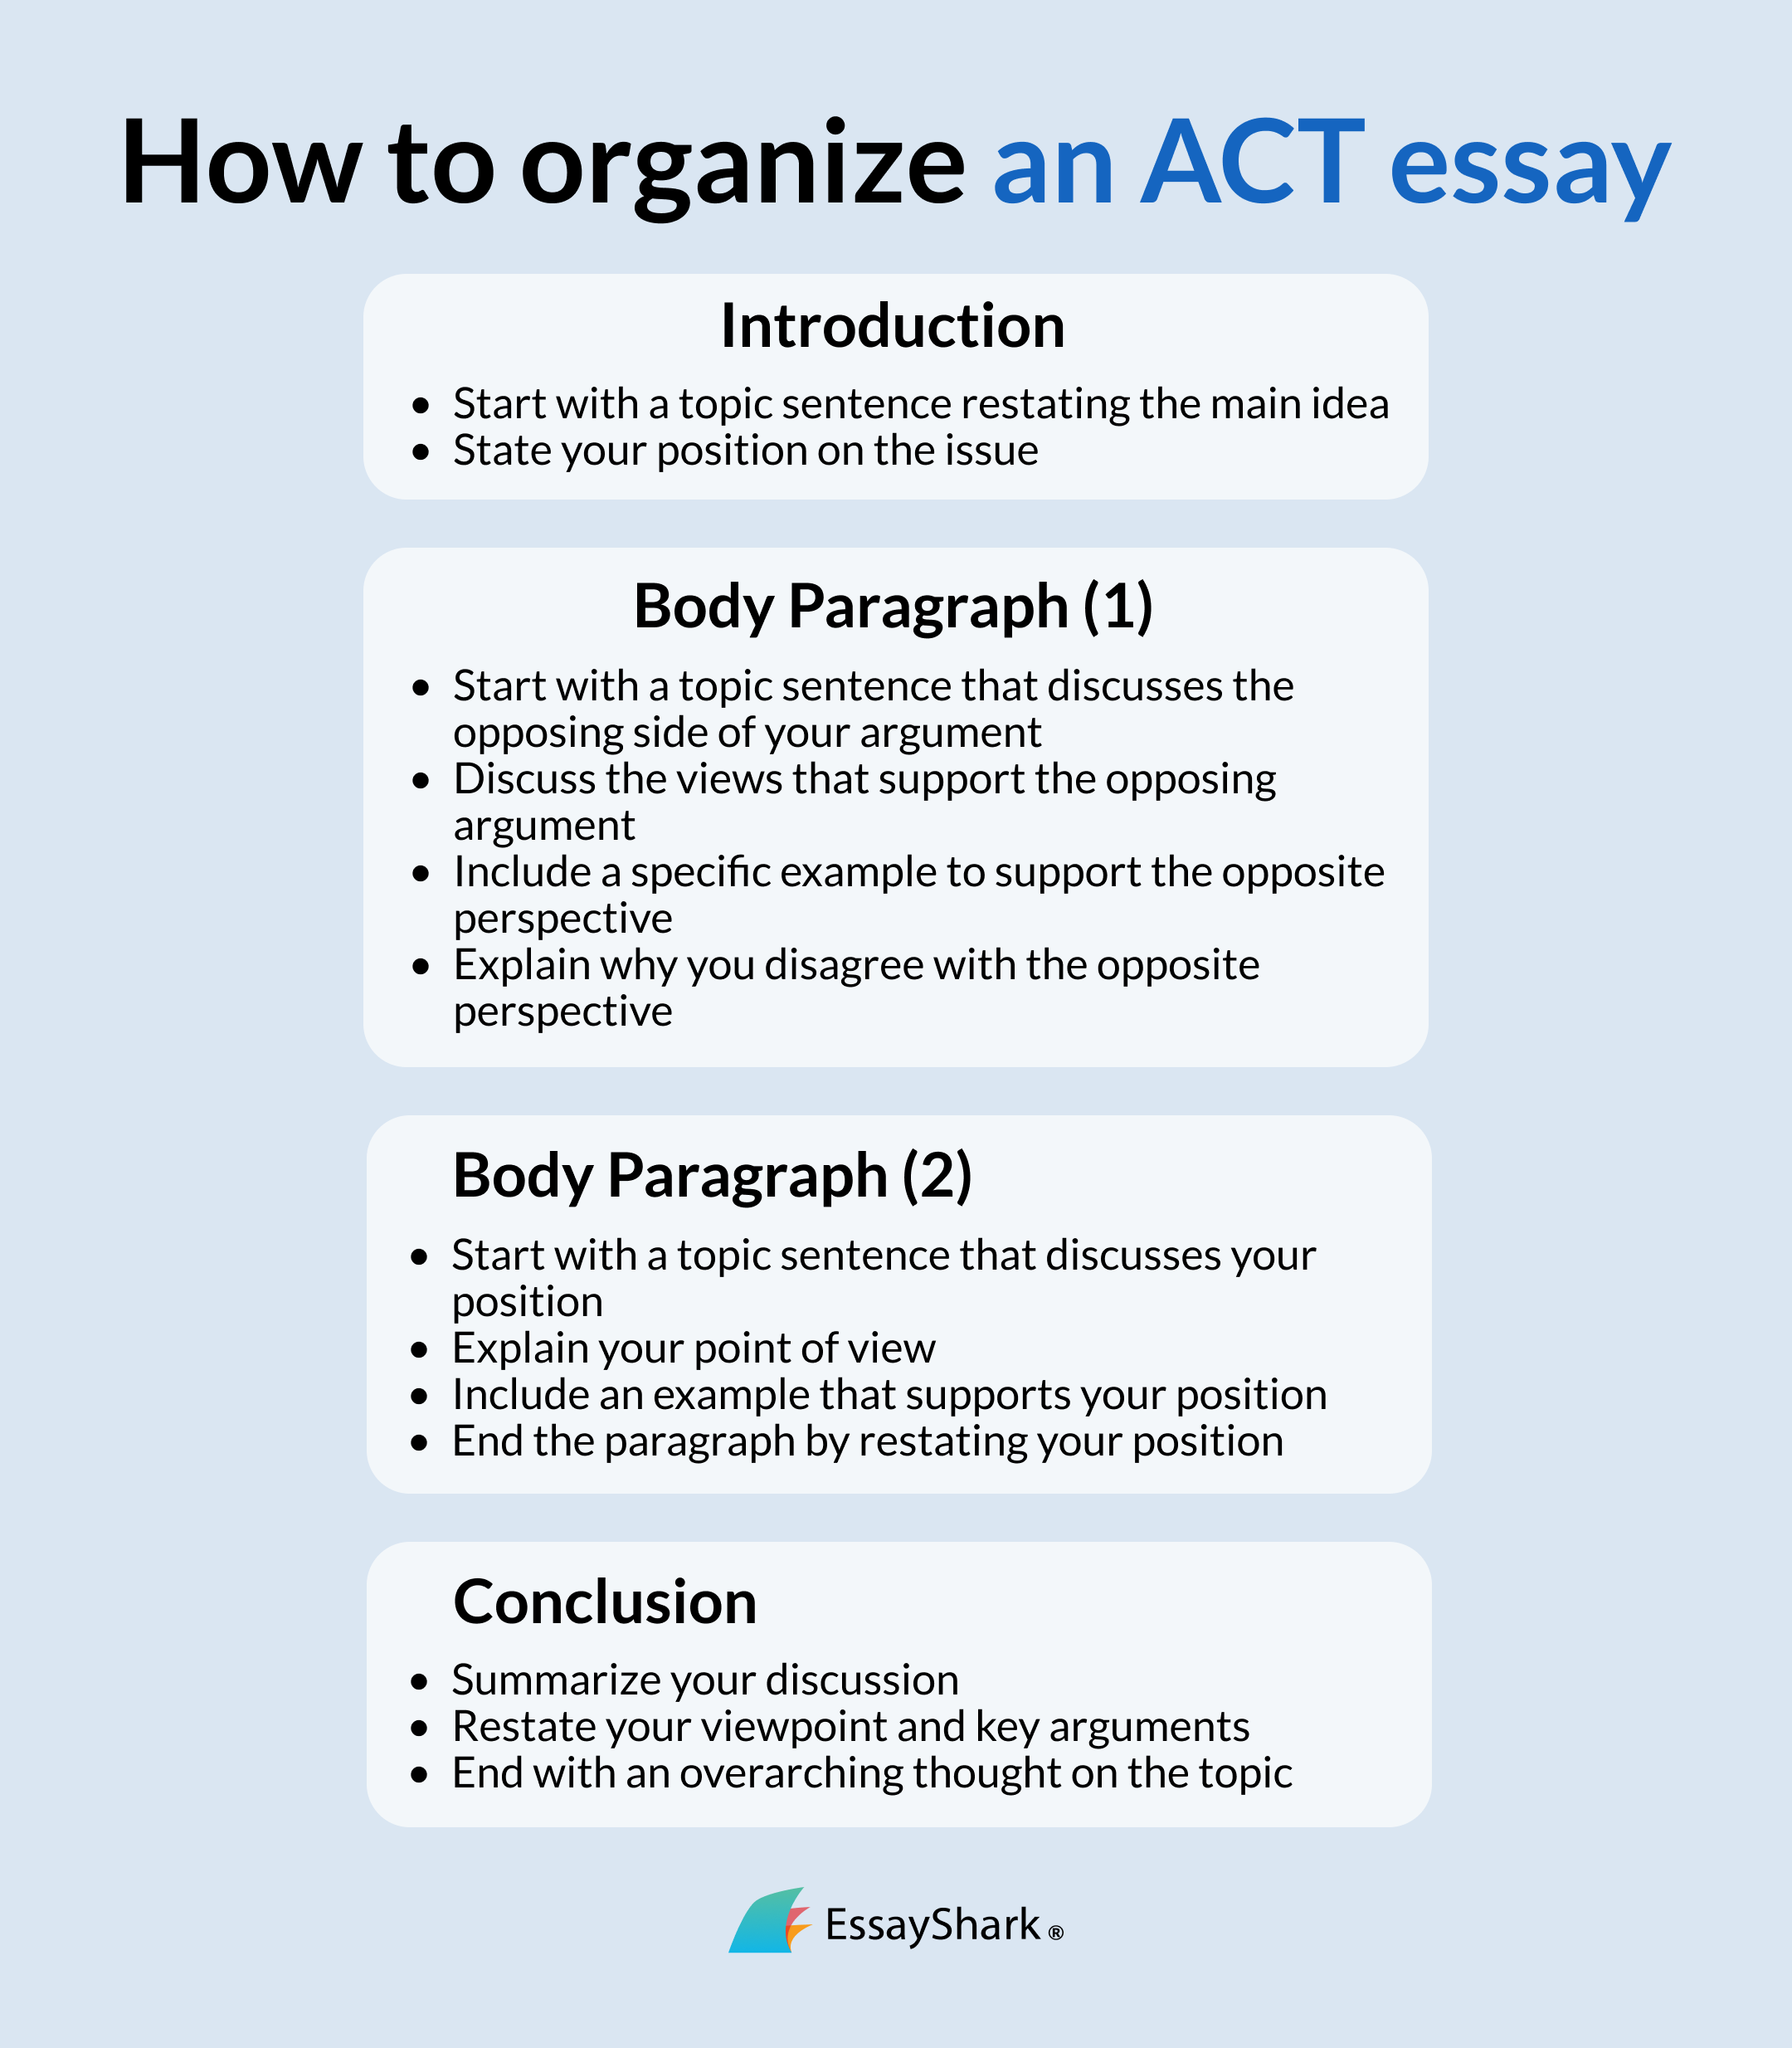 How to Organize an ACT Essay